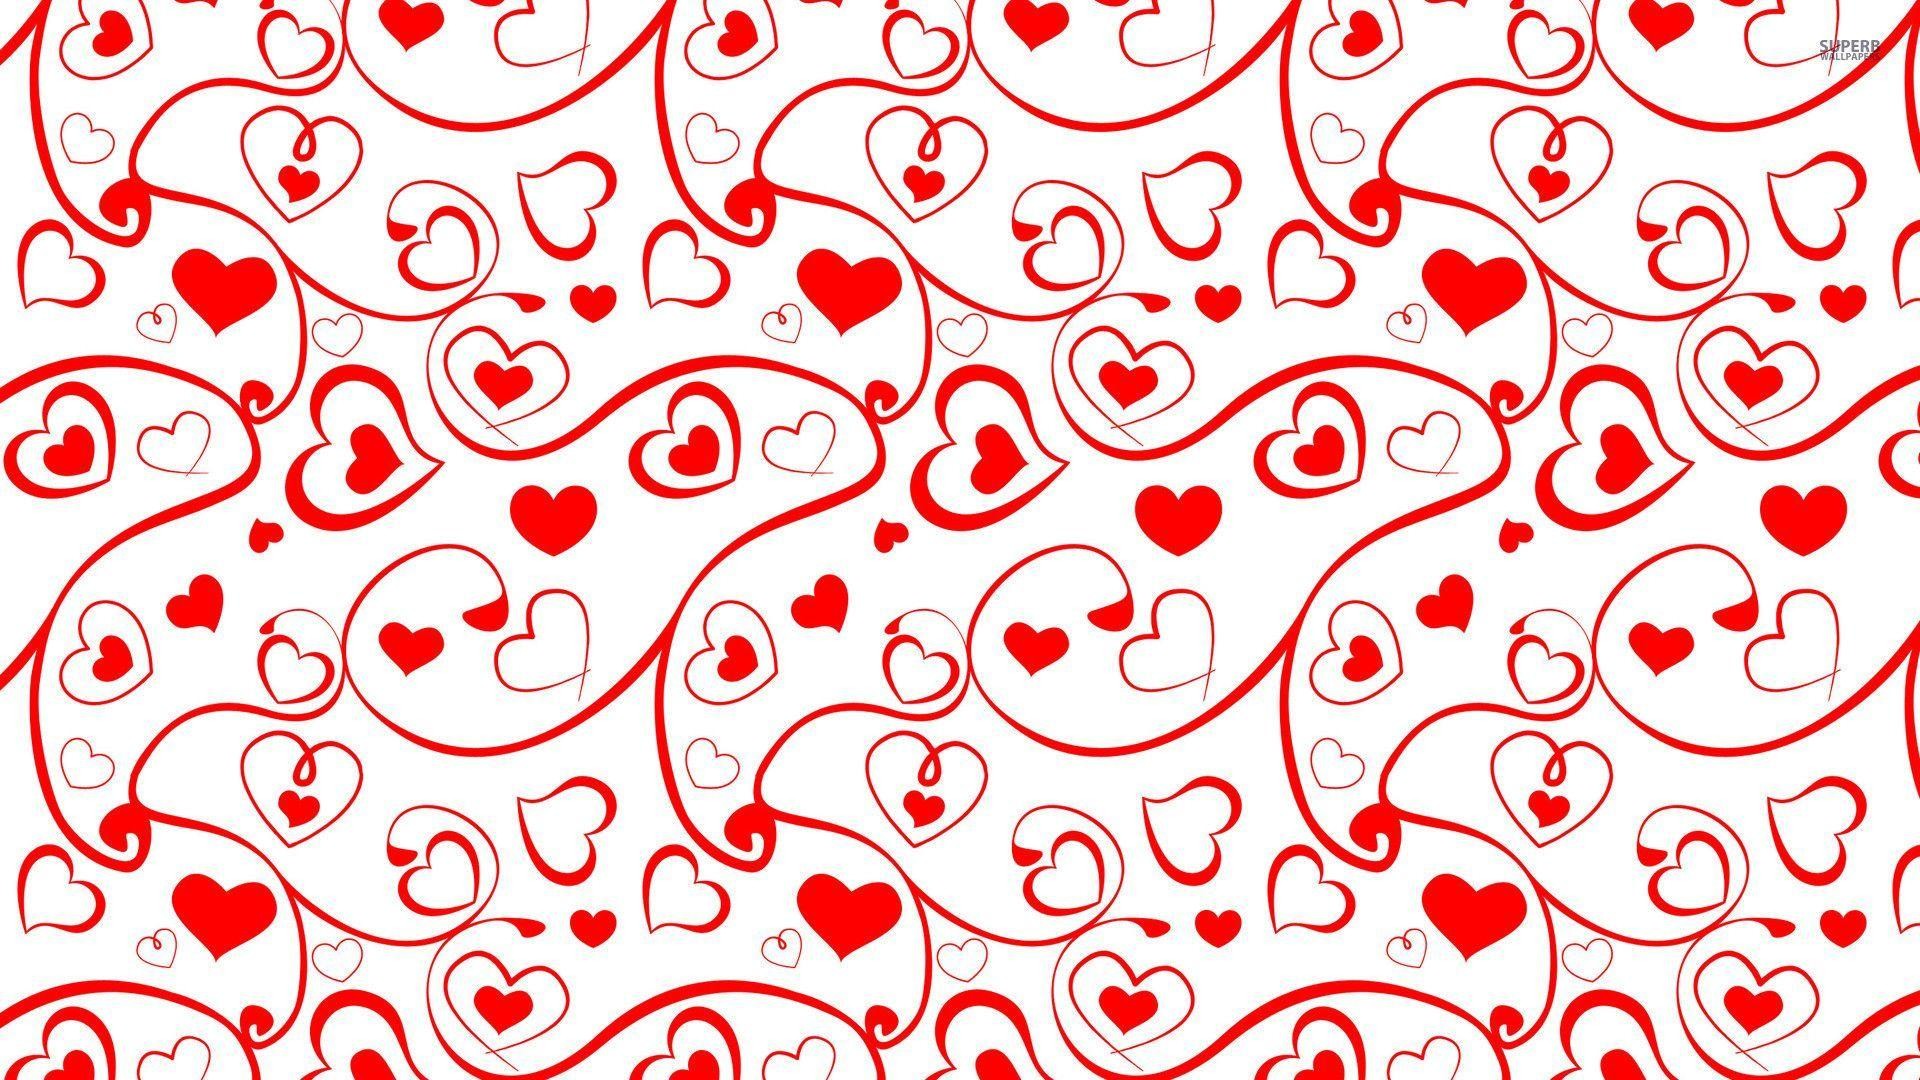 1920x1080 Heart and swirl pattern wallpaper - Holiday wallpapers - #